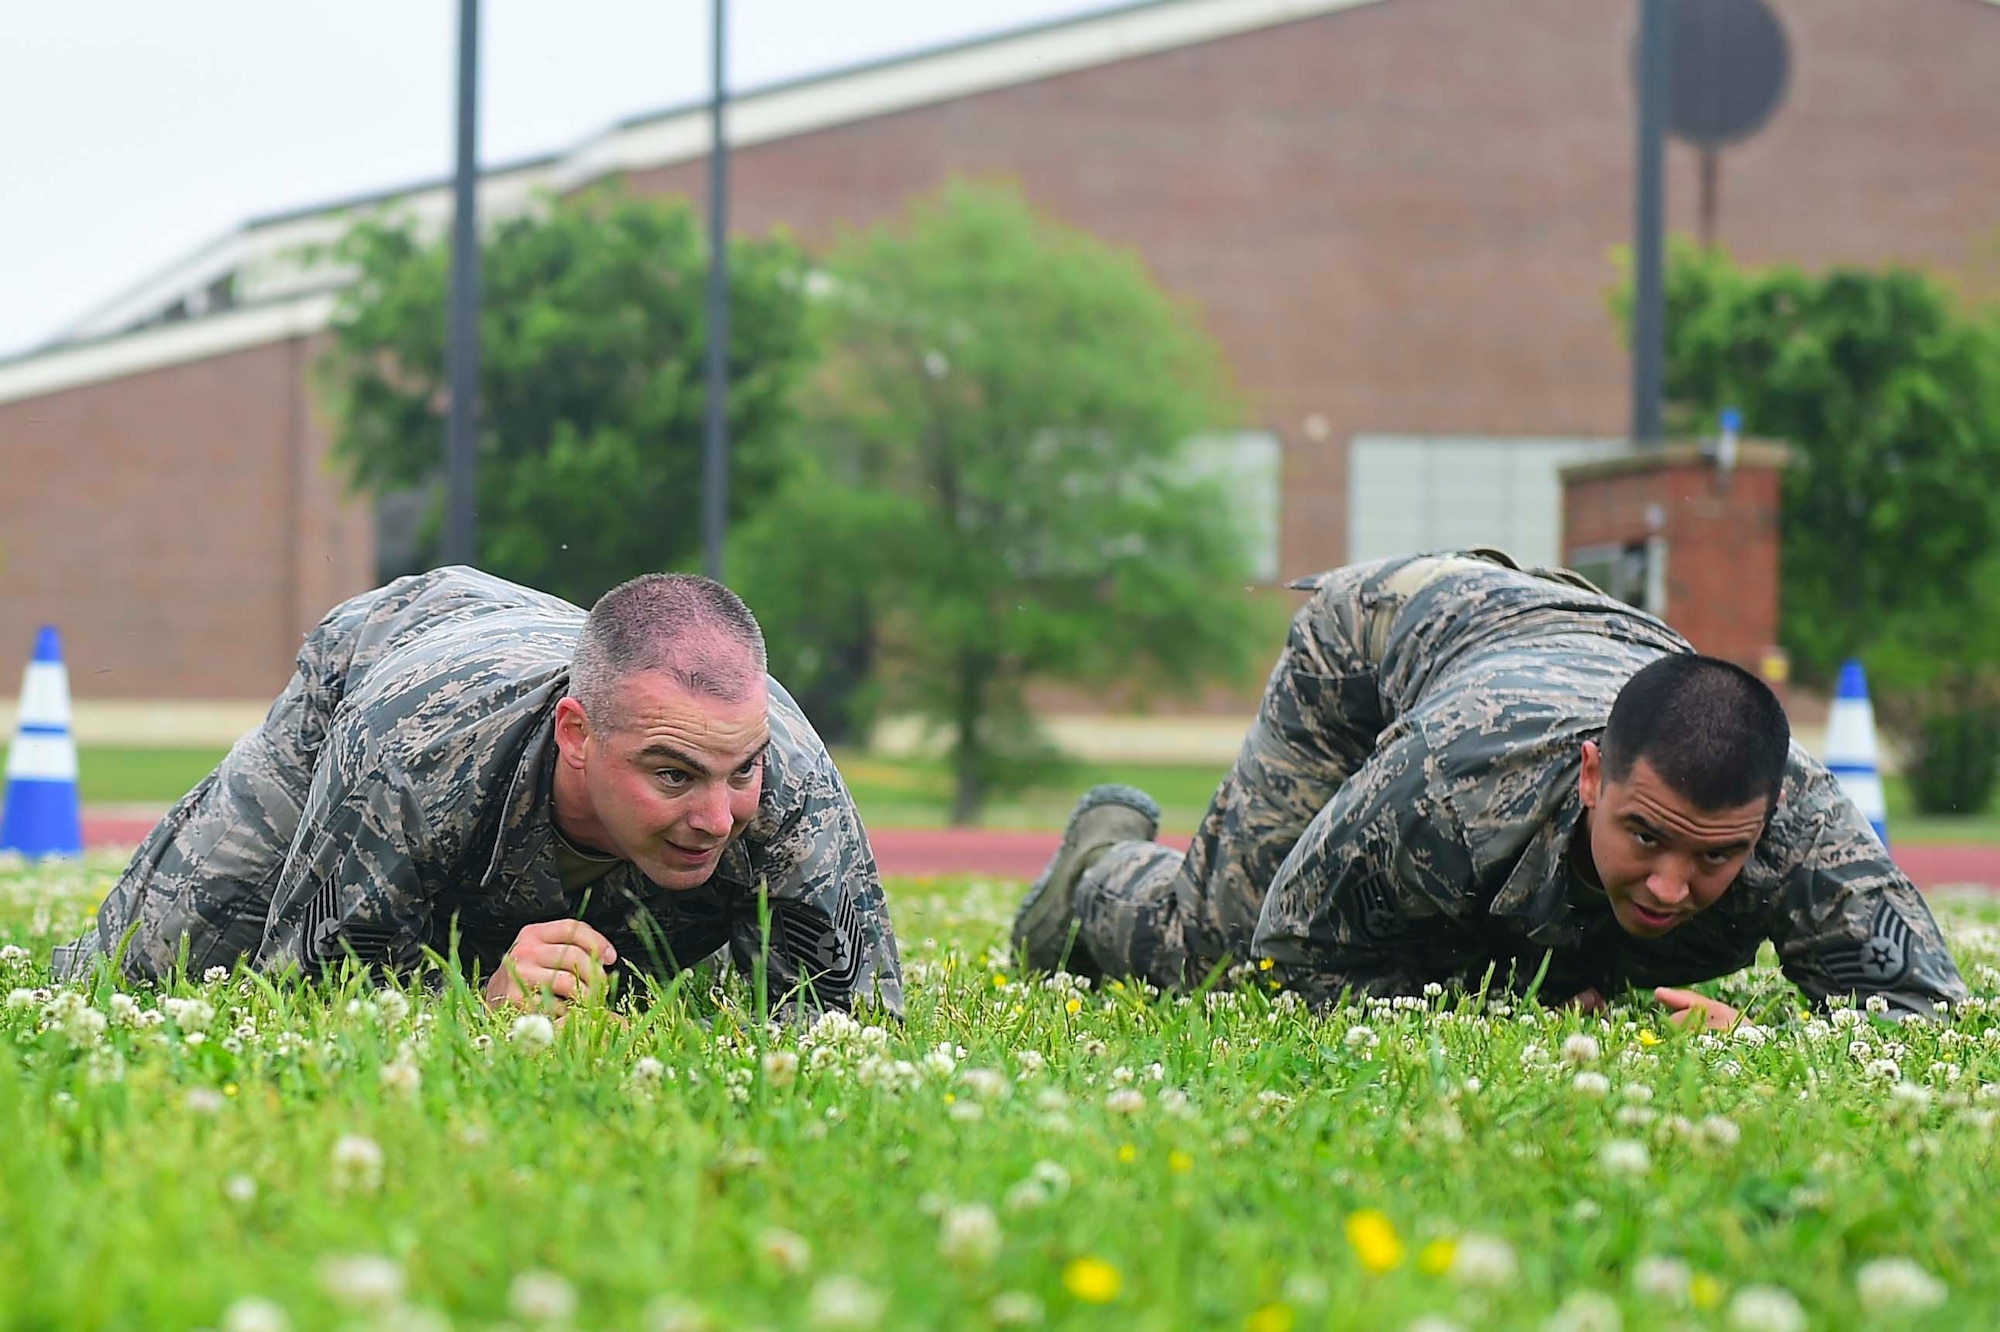 Members of the 633rd Security Forces Squadron Emergency Services Team perform a high crawl during a modified Marine Combat Physical Test at Joint Base Langley-Eustis, Va., April 28, 2017. The team provide services equal to a civilian police SWAT (Special Weapons and tactics) Team , to the installation and train to handle hostage and barricaded suspect situations. (U.S. Air Force photo/Senior Airman Derek Seifert)